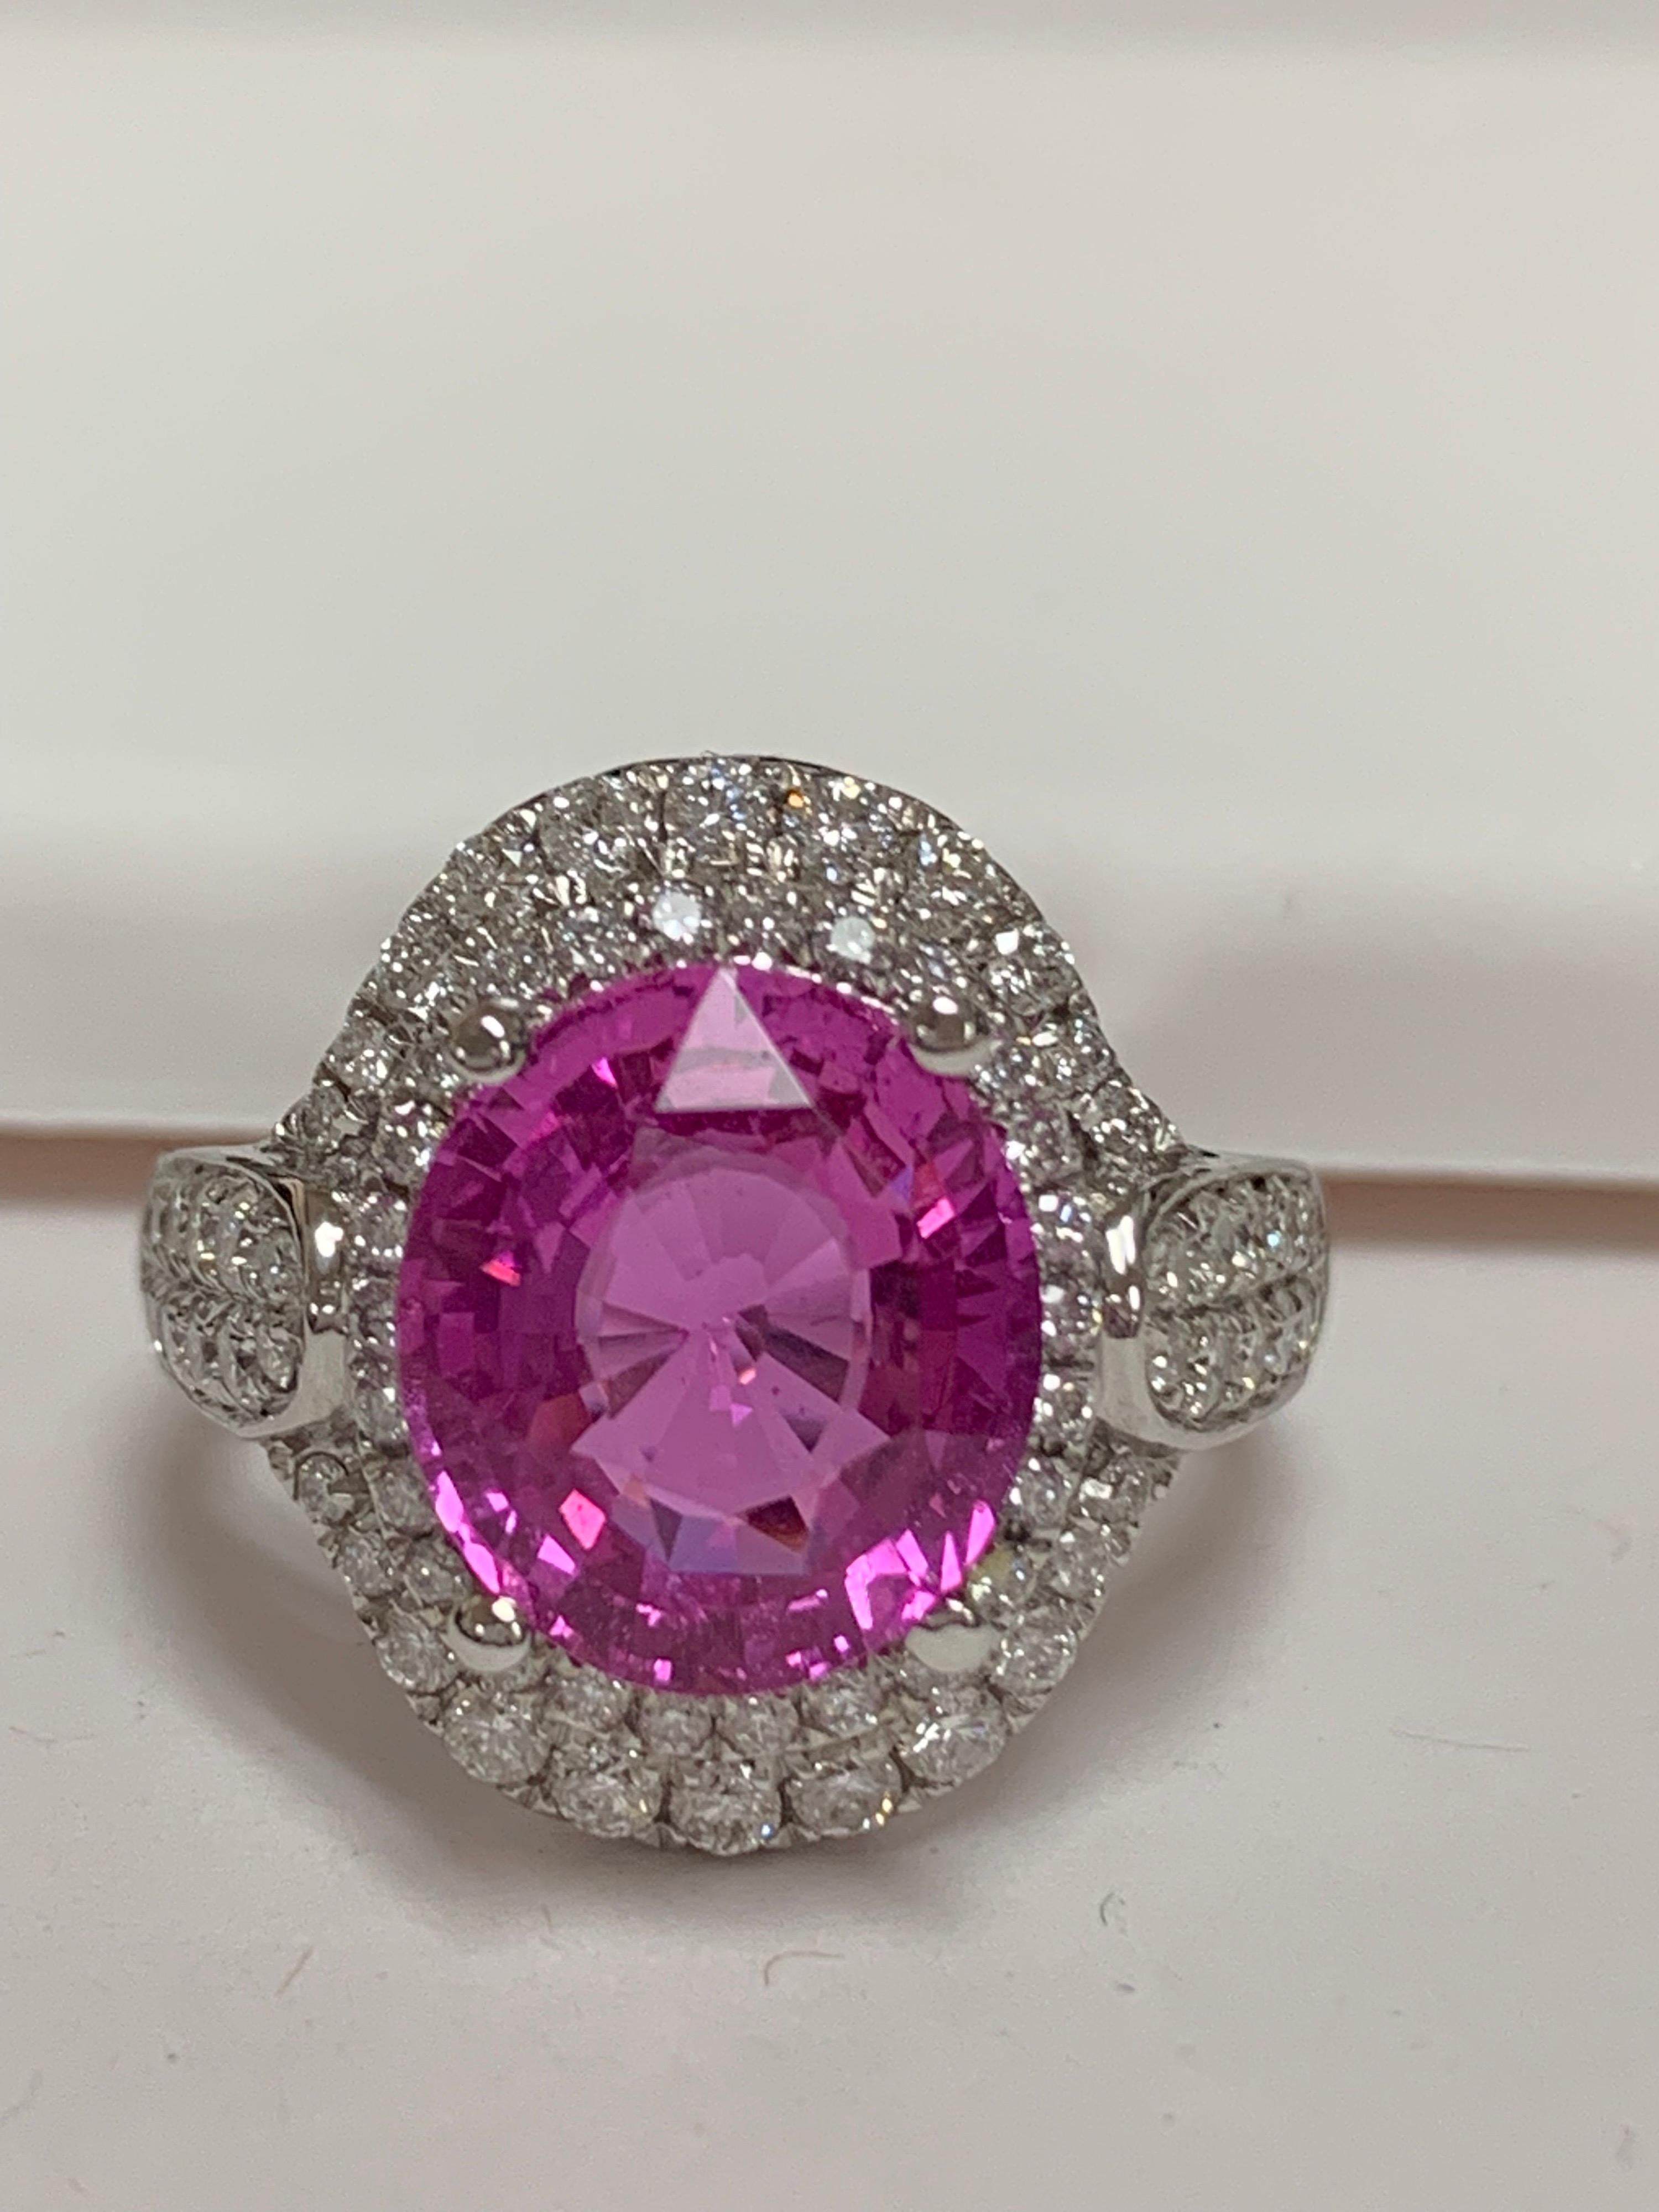 Women's GIA Certified 5.12 Carat Pink sapphire and Diamonds Ring